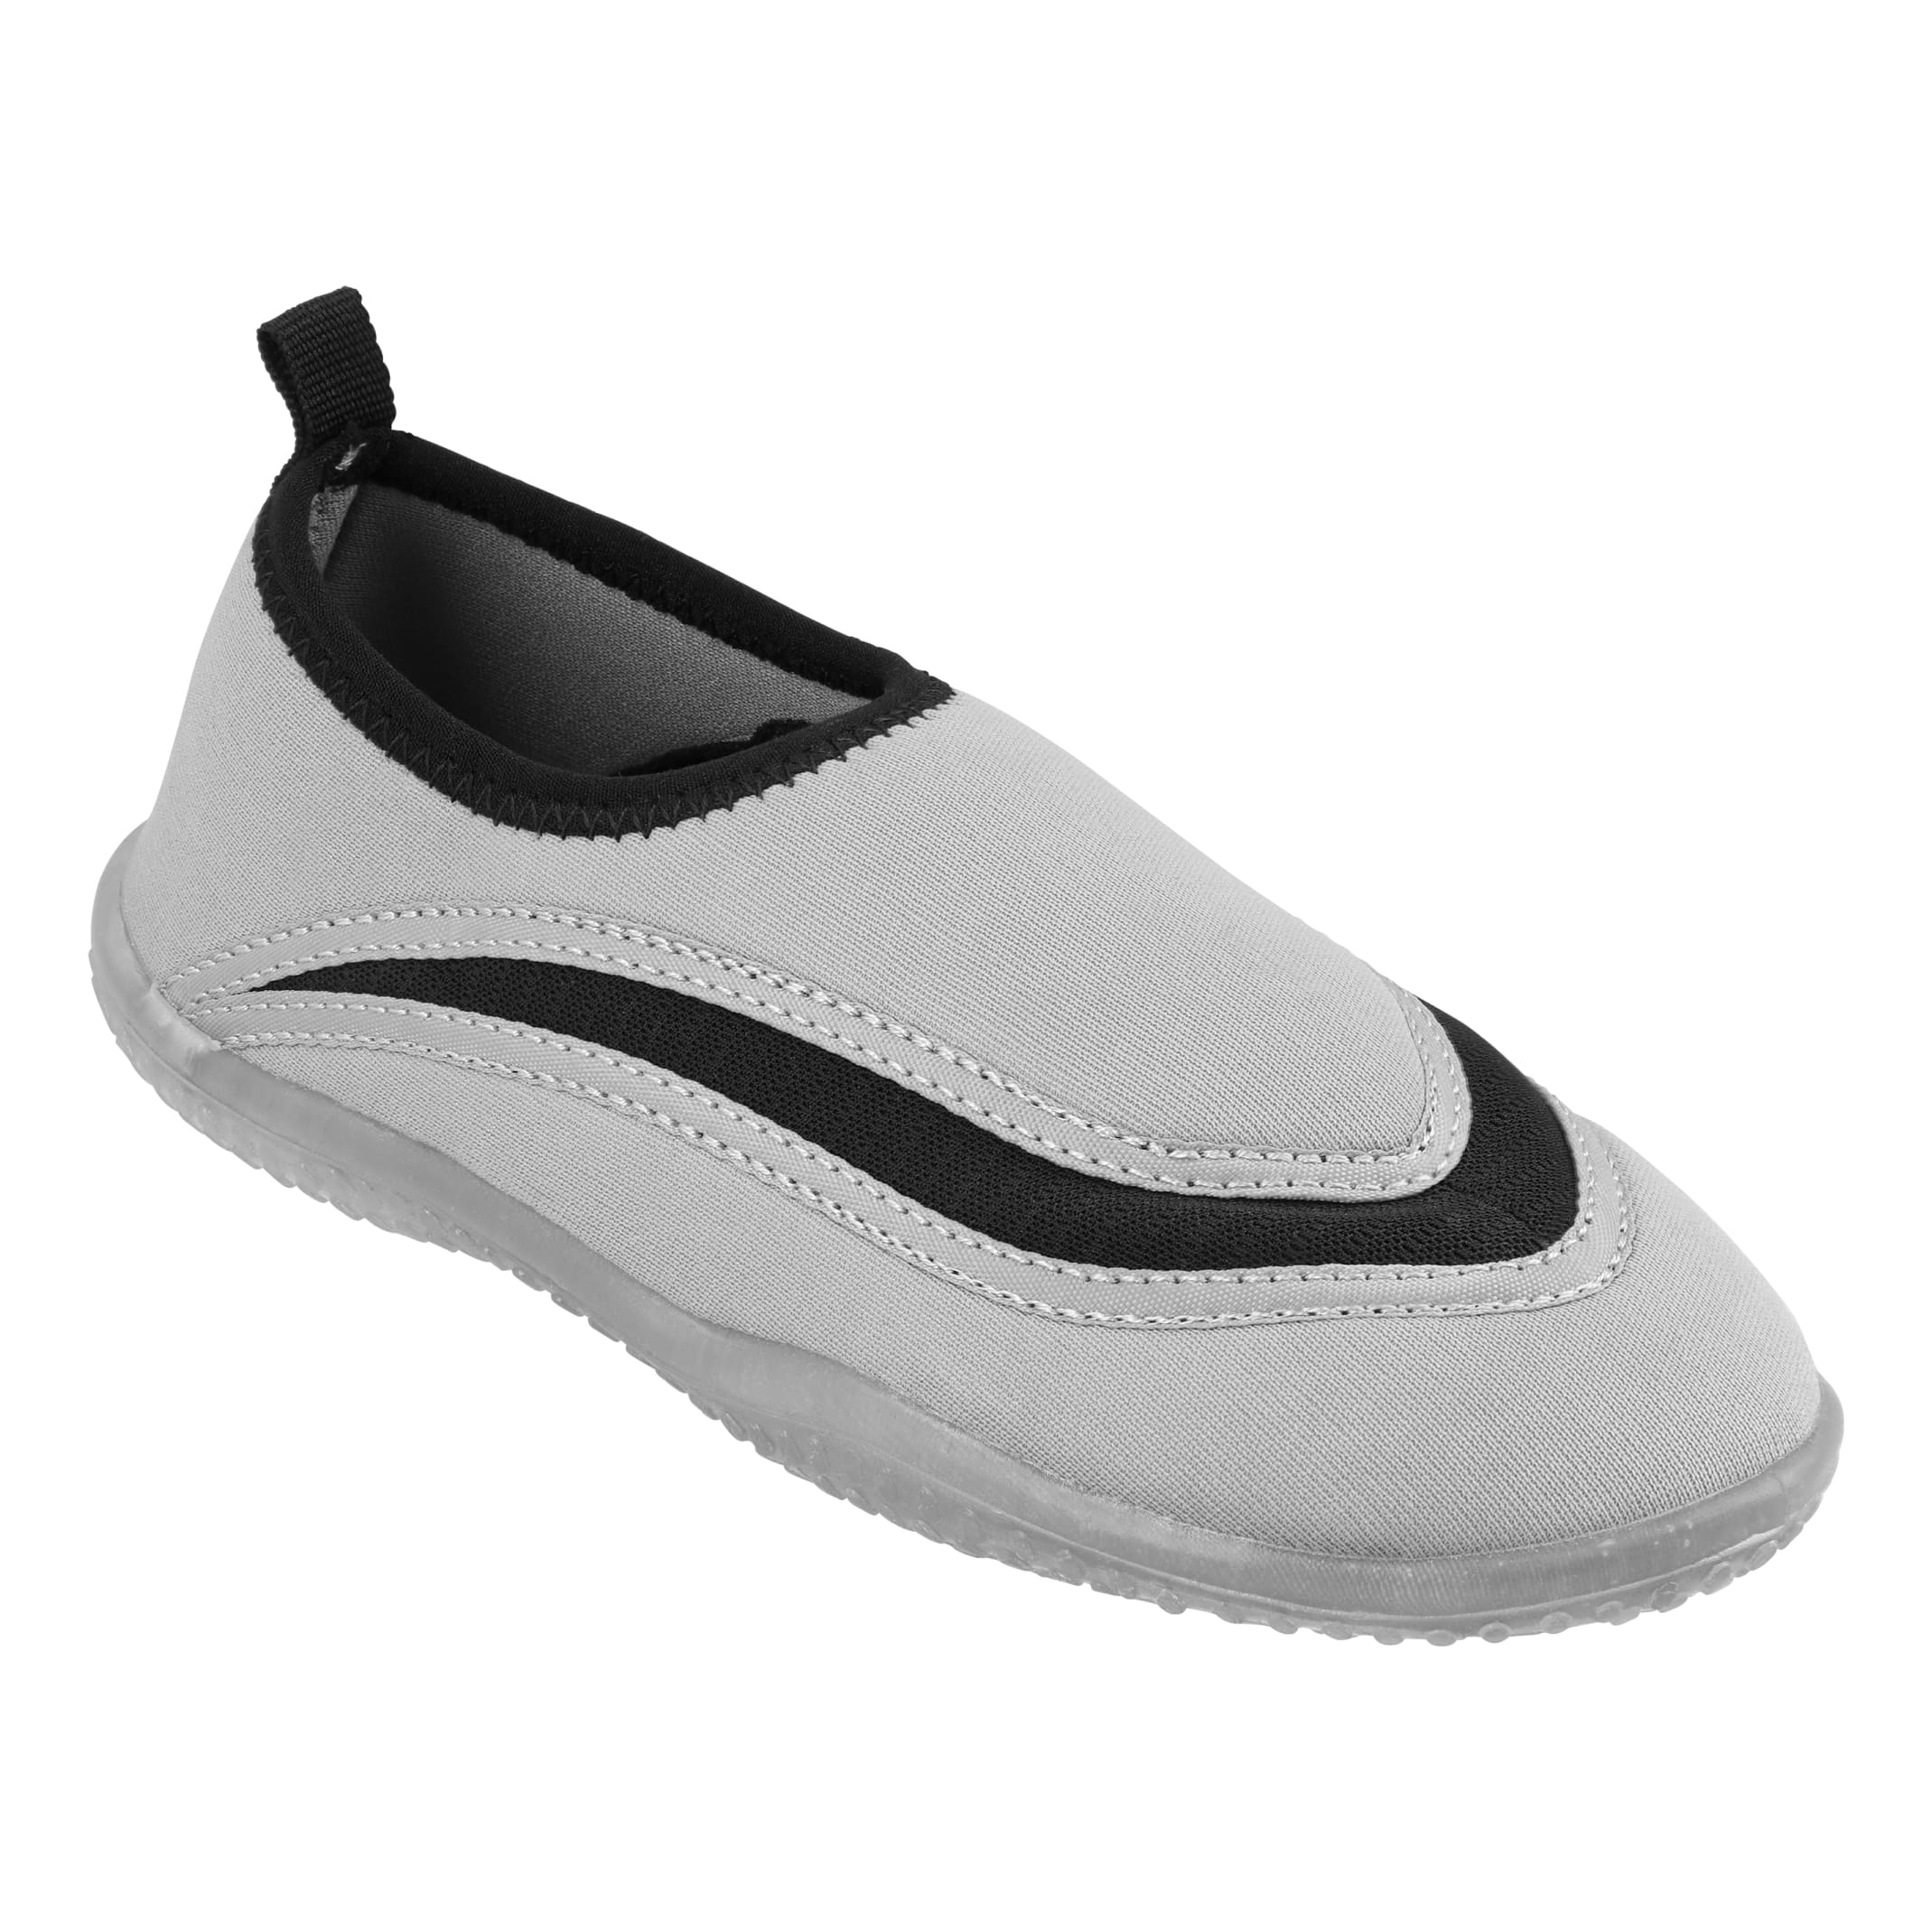 New Childrens Athletic Water Shoes Aqua Socks Available in 4 Colors 